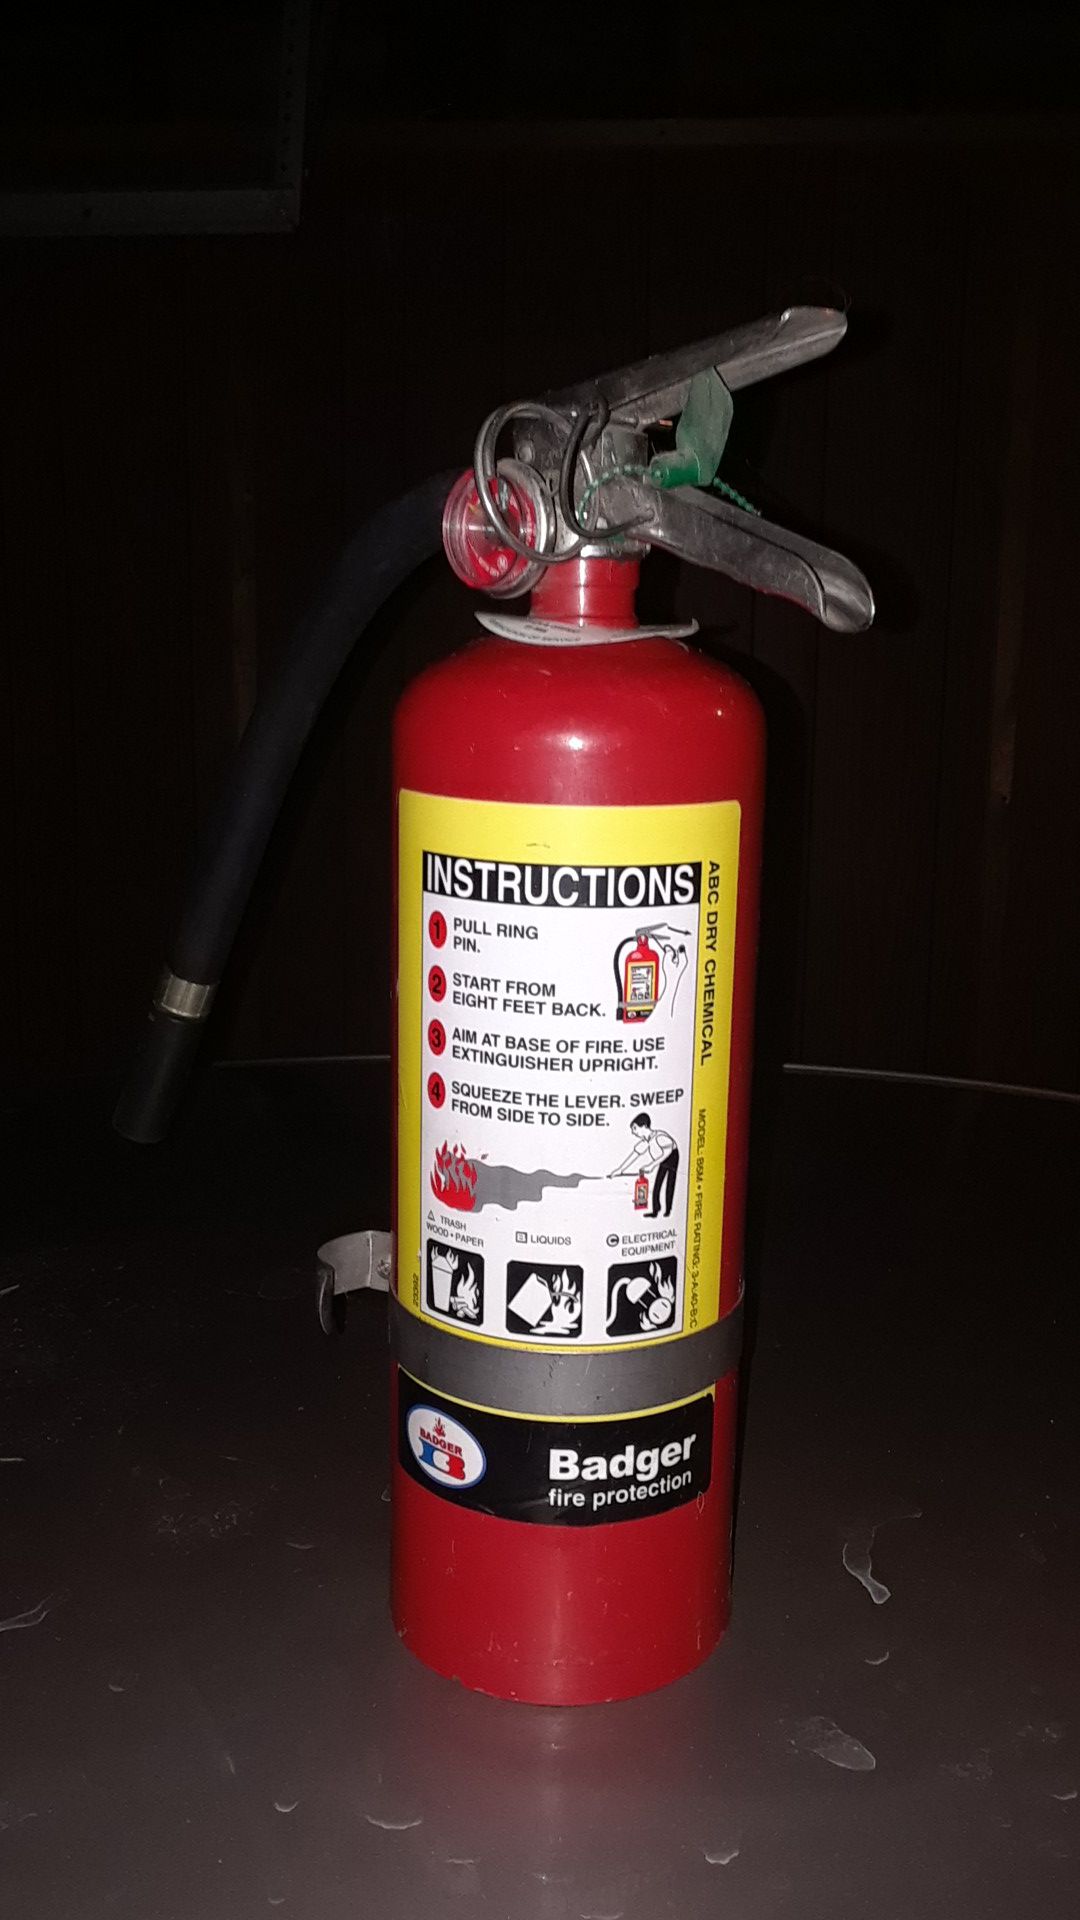 Badger fire protection never used